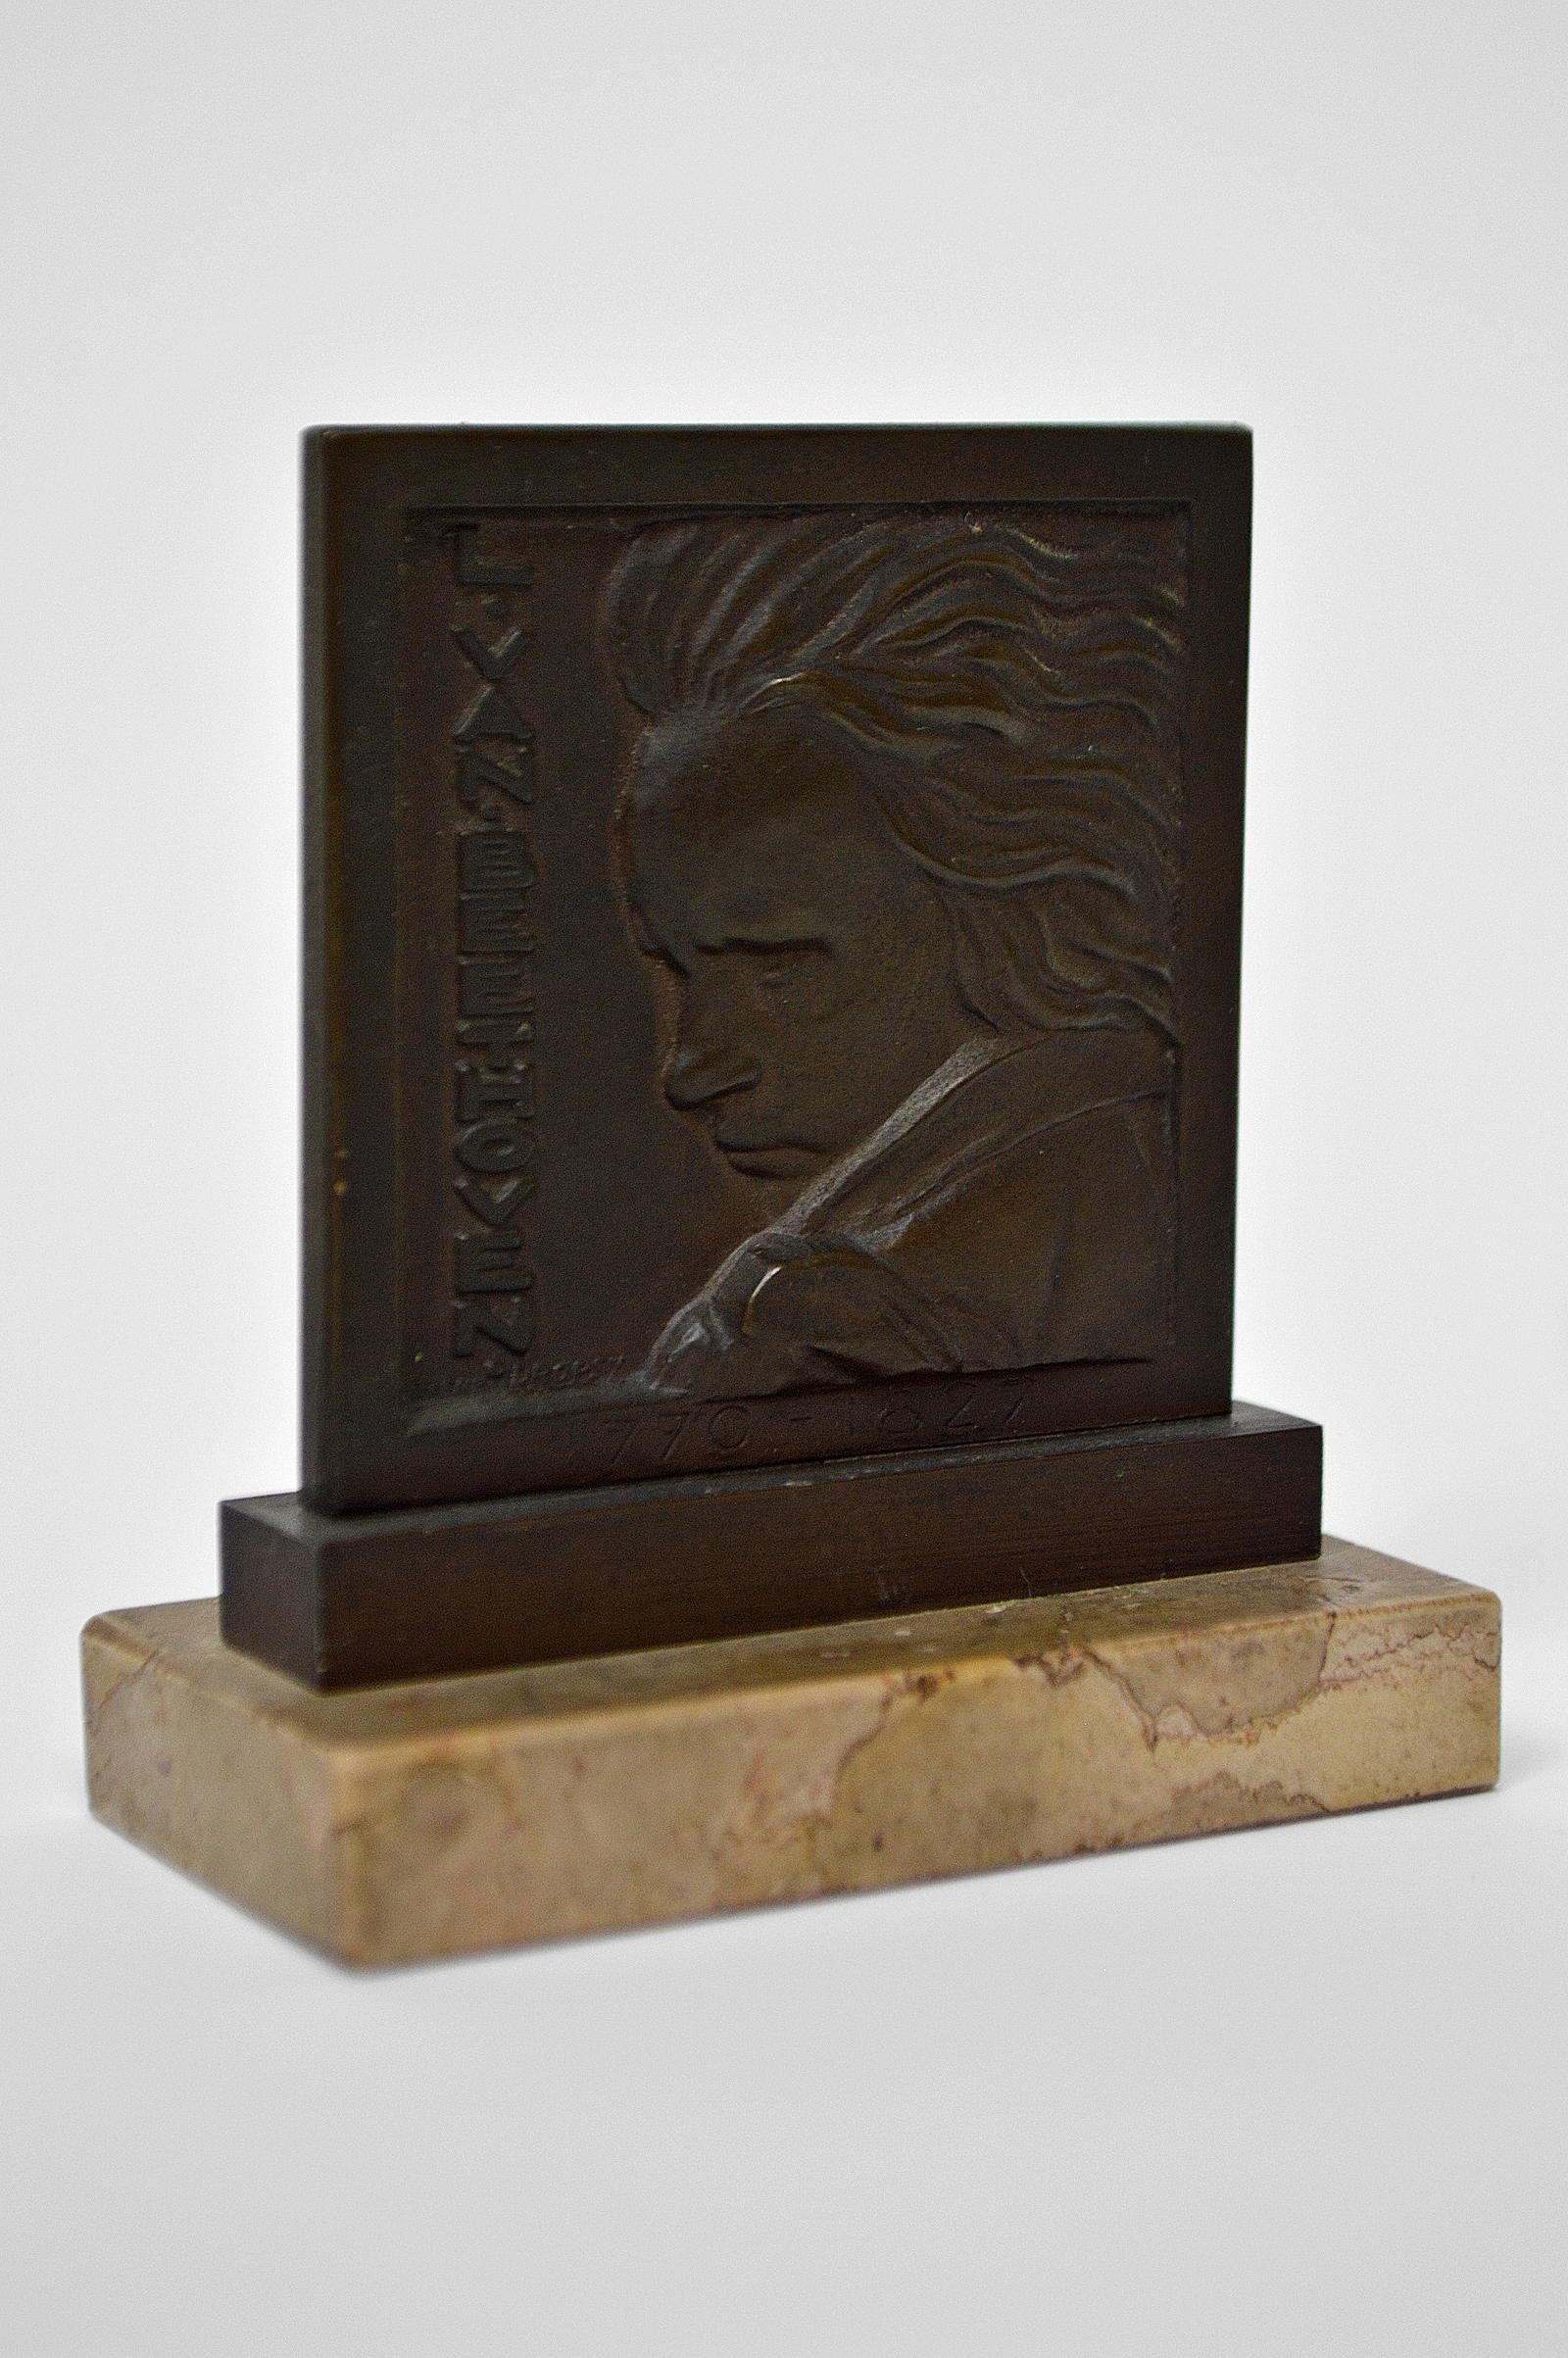 Bronze medal mounted on marble, representing the famous musician Ludwig van Beethoven.

By Henri Dropsy, France, around 1920.
In very good condition. 

Sculpture probably made on the occasion of the centenary of Beethoven's